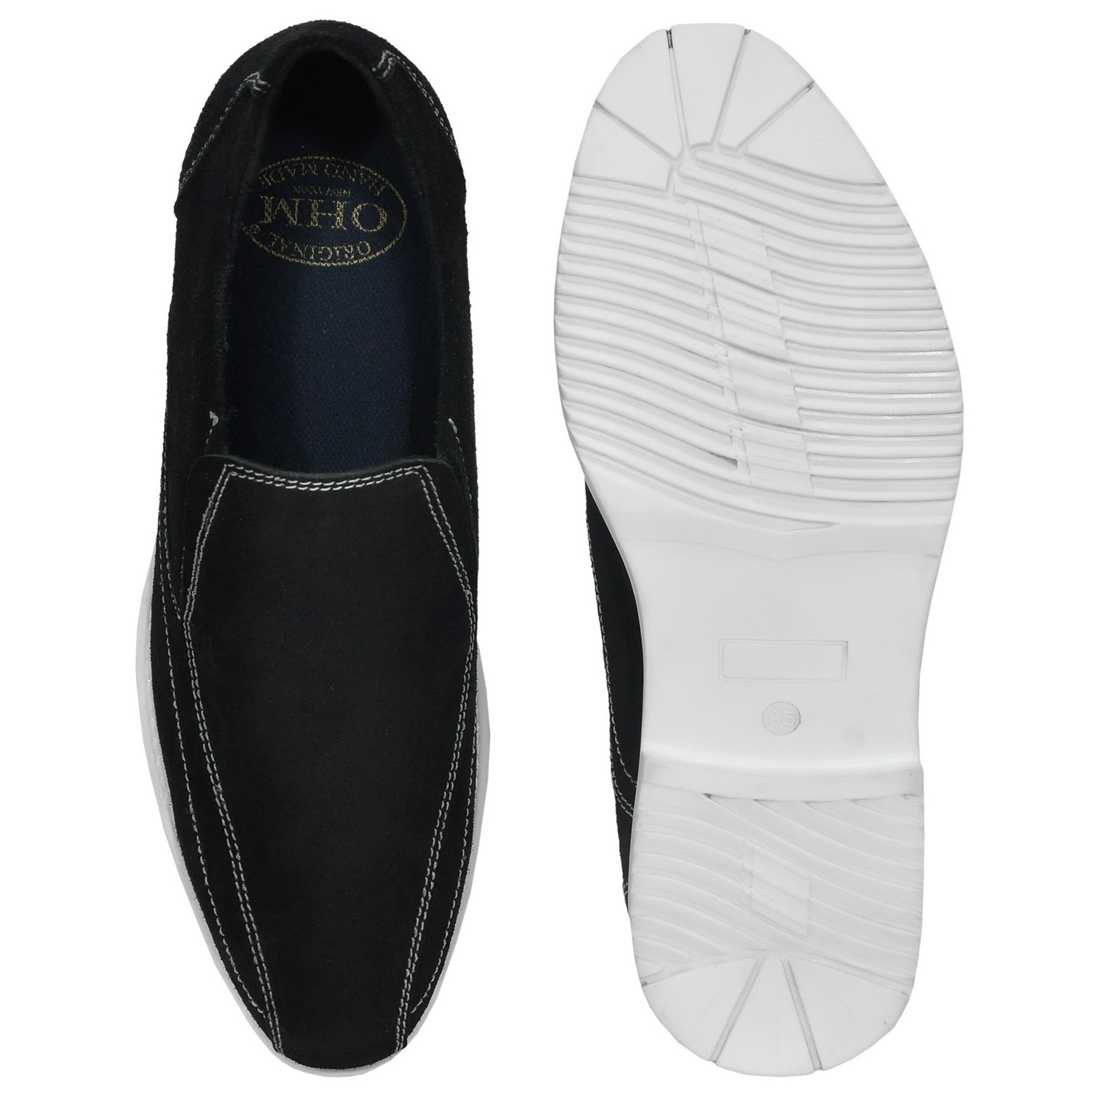 OHM New York American Lifestyle Slip-on Leather Shoes